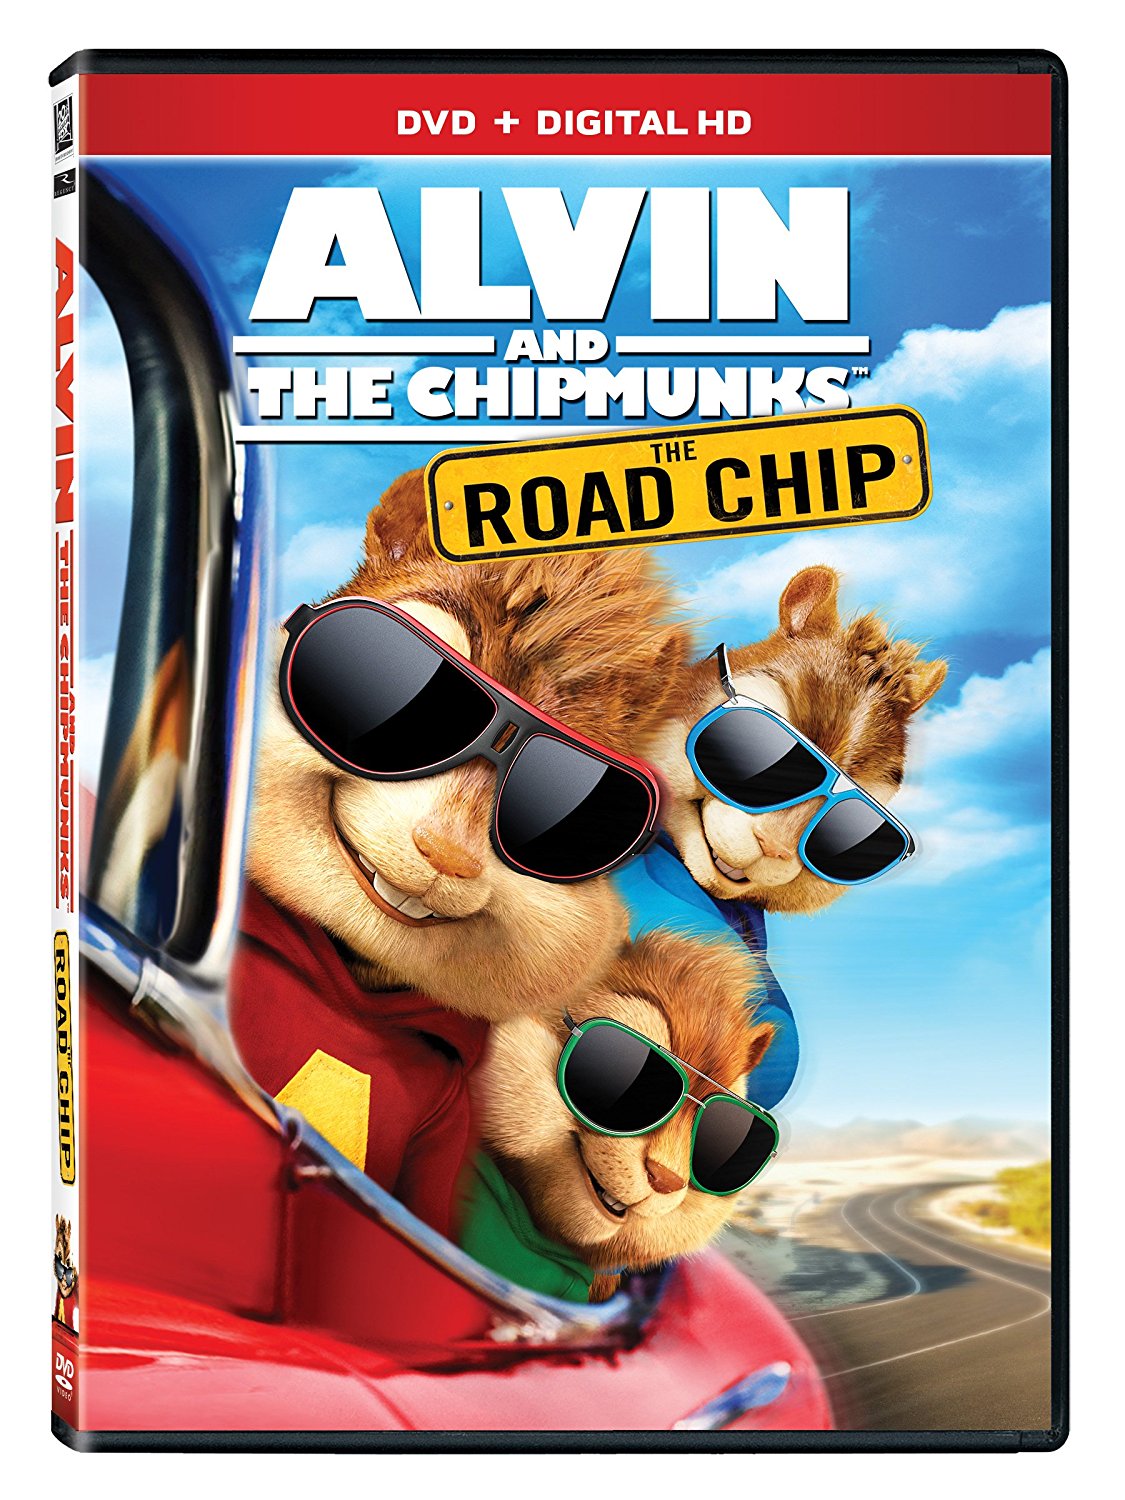 HQ Alvin And The Chipmunks: The Road Chip Wallpapers | File 320.2Kb